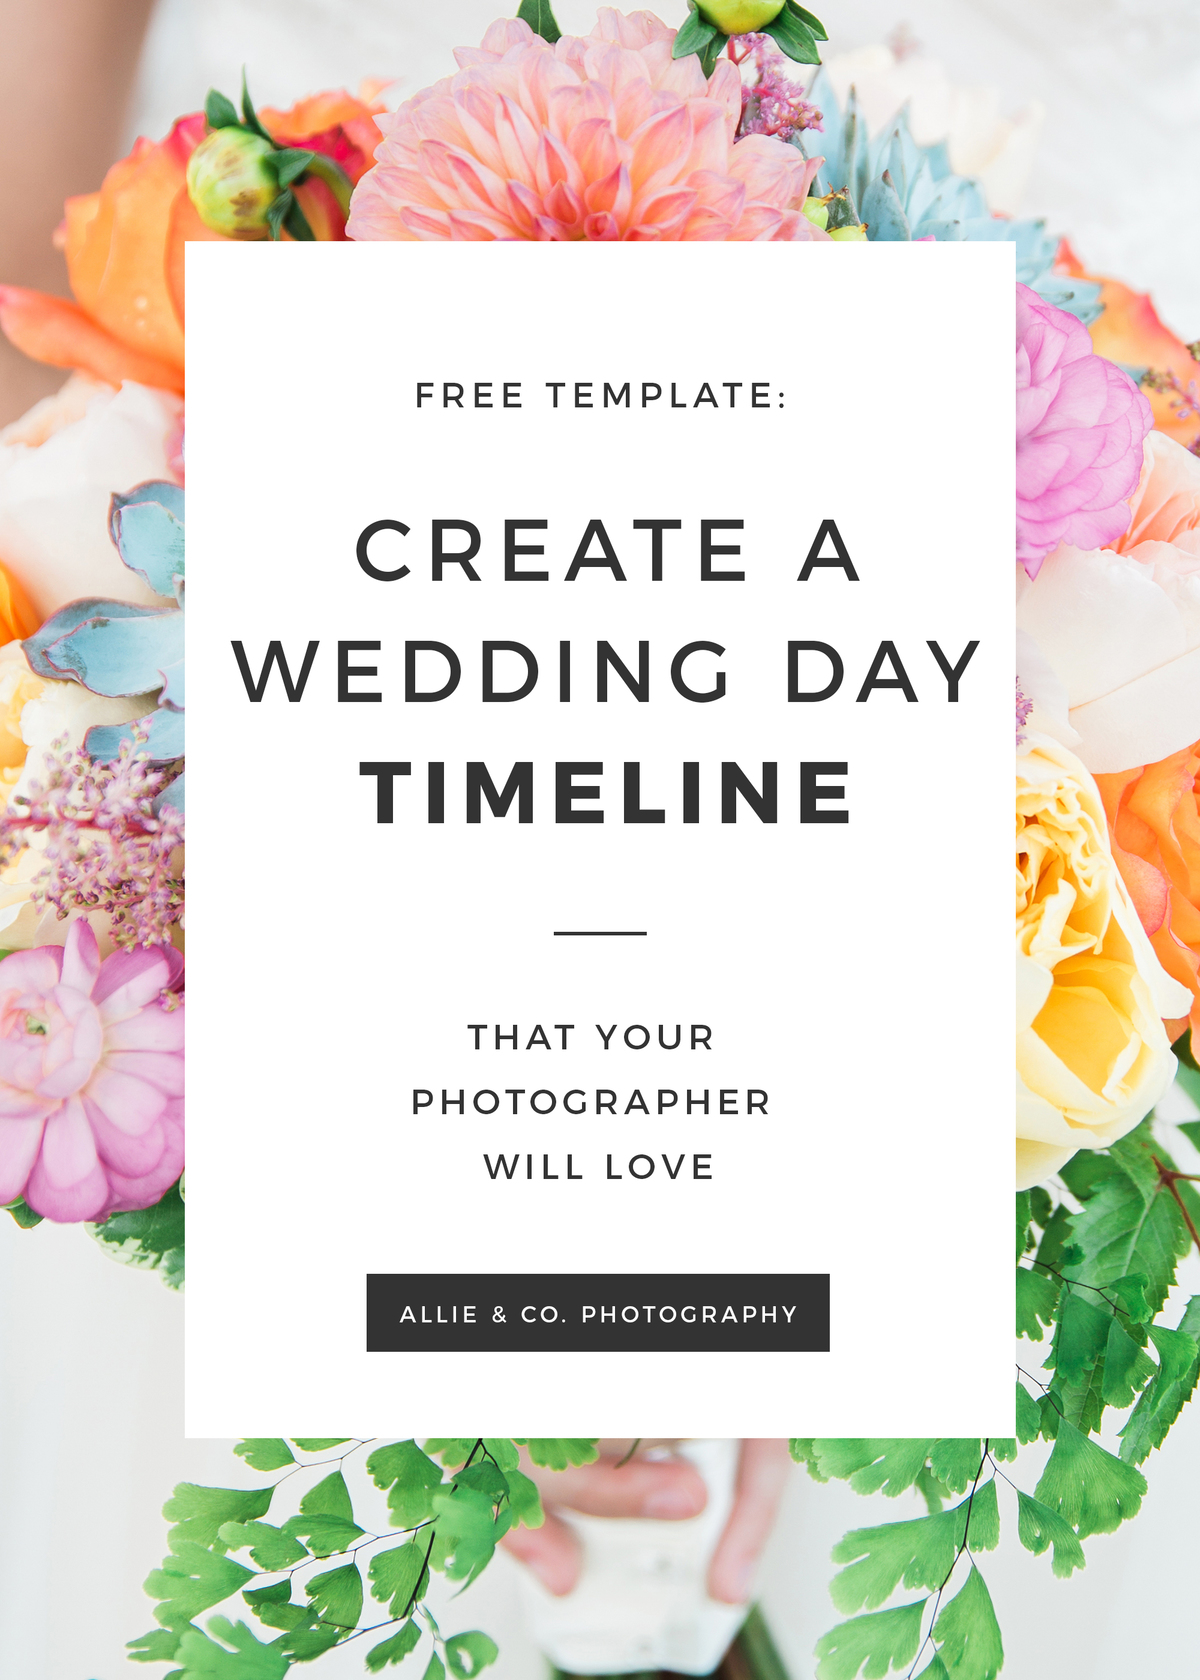 how to create a wedding day timeline (free template)